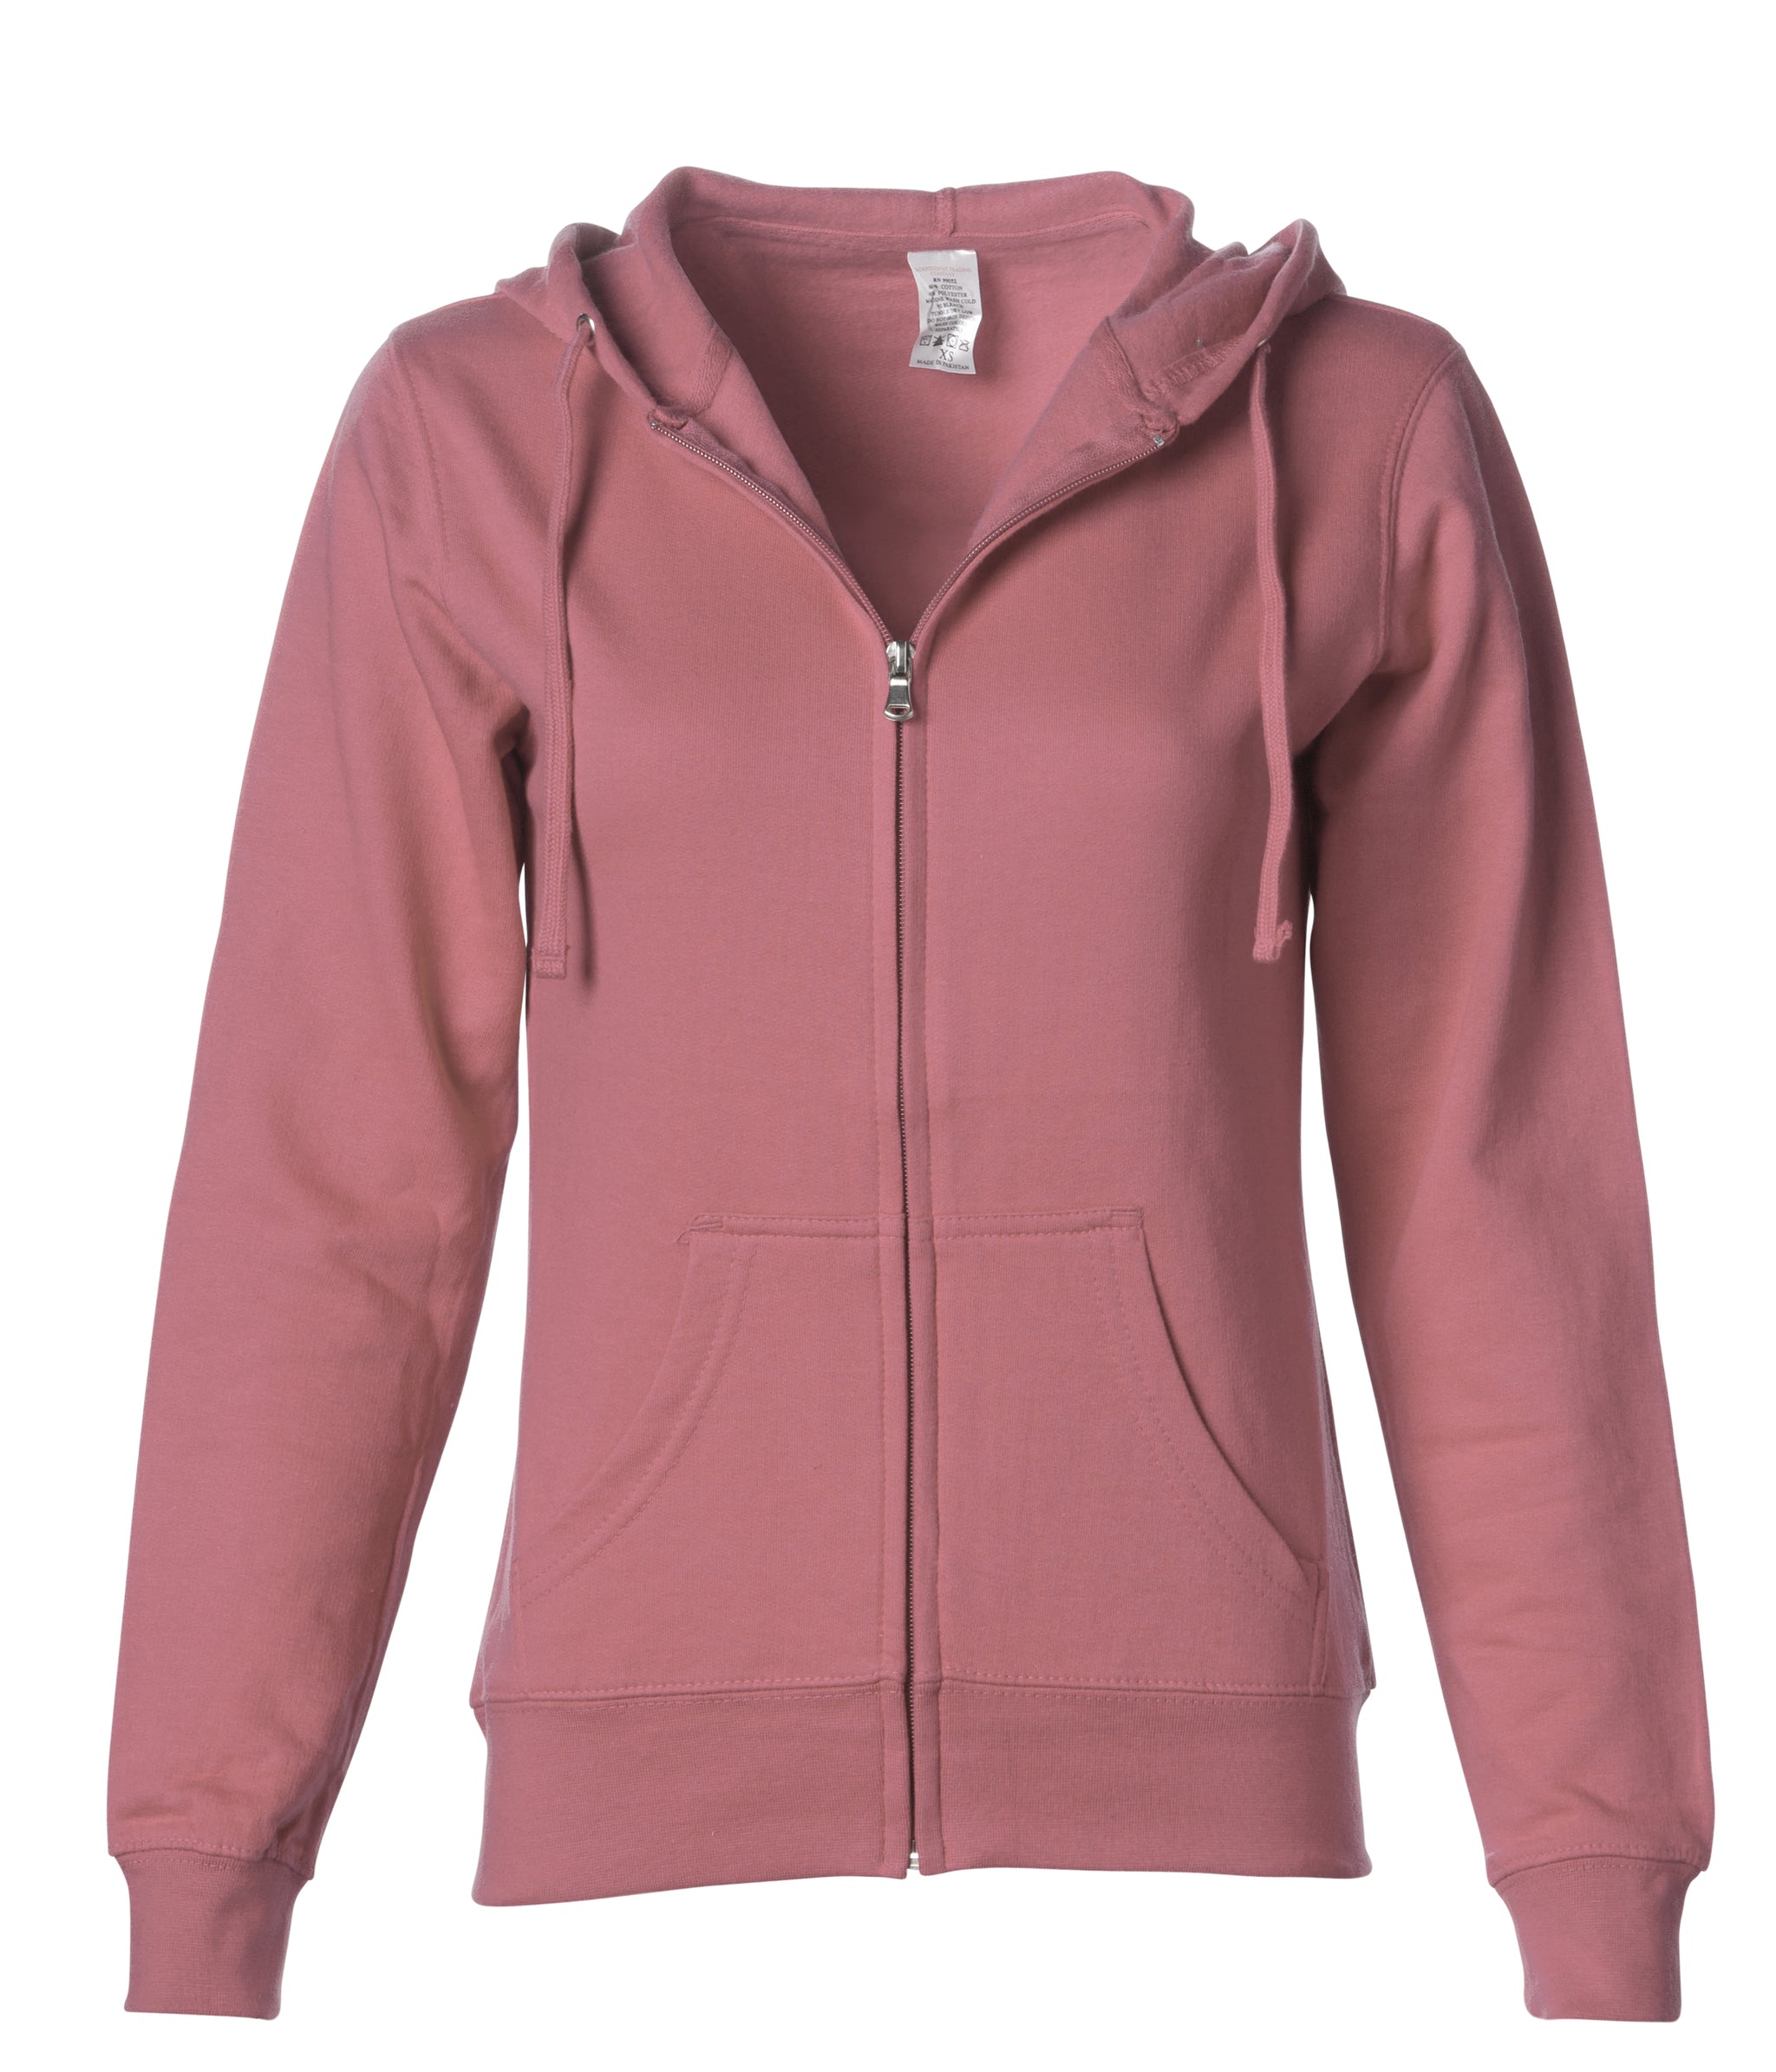 Megalopolis Grusom fællesskab Womens Lightweight Zip Hooded Sweatshirt | Independent Trading Company